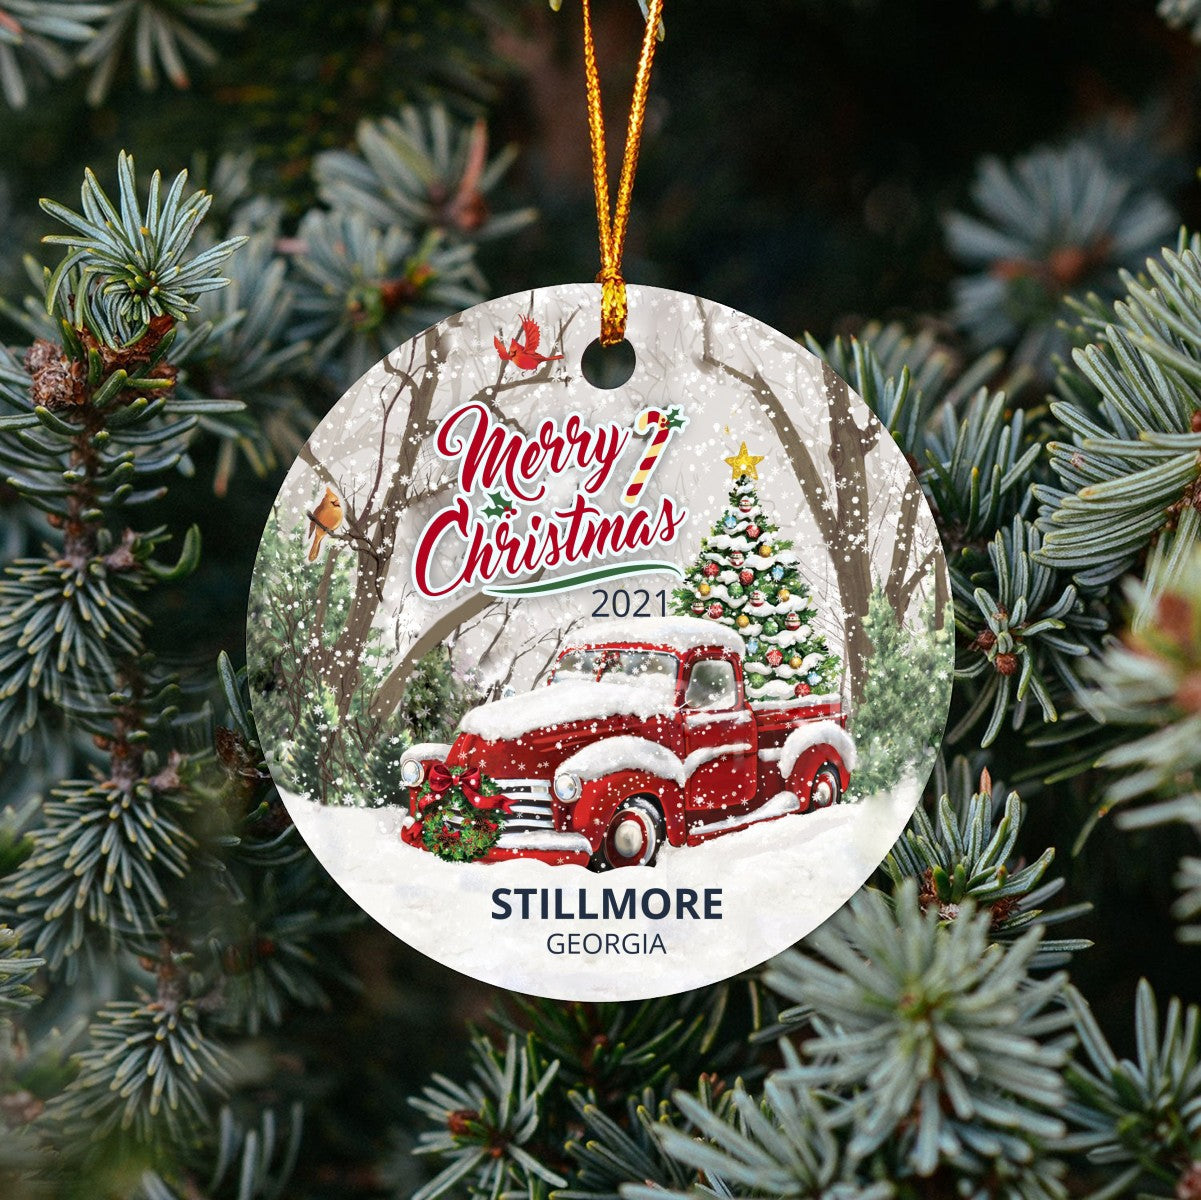 Christmas Tree Ornaments Stillmore - Ornament With Name City, State Stillmore Georgia GA Ornament - Red Truck Xmas Ornaments 3'' Plastic Gift For Family, Friend And Housewarming